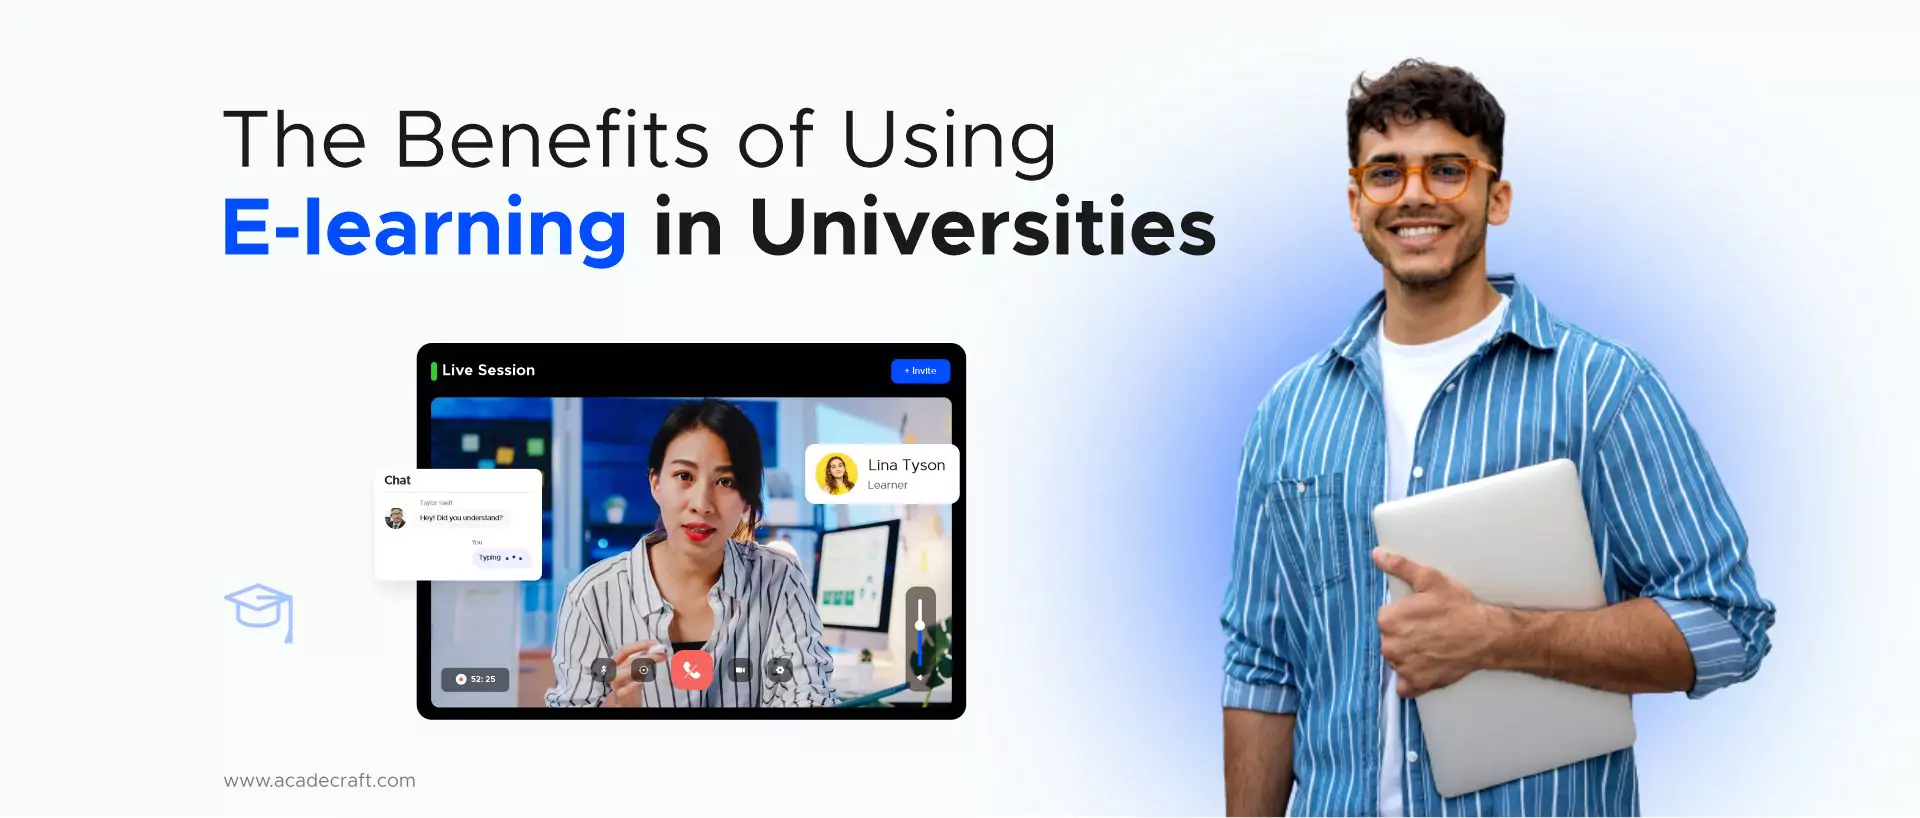 Exploring The Benefits of E-learning in Higher Education